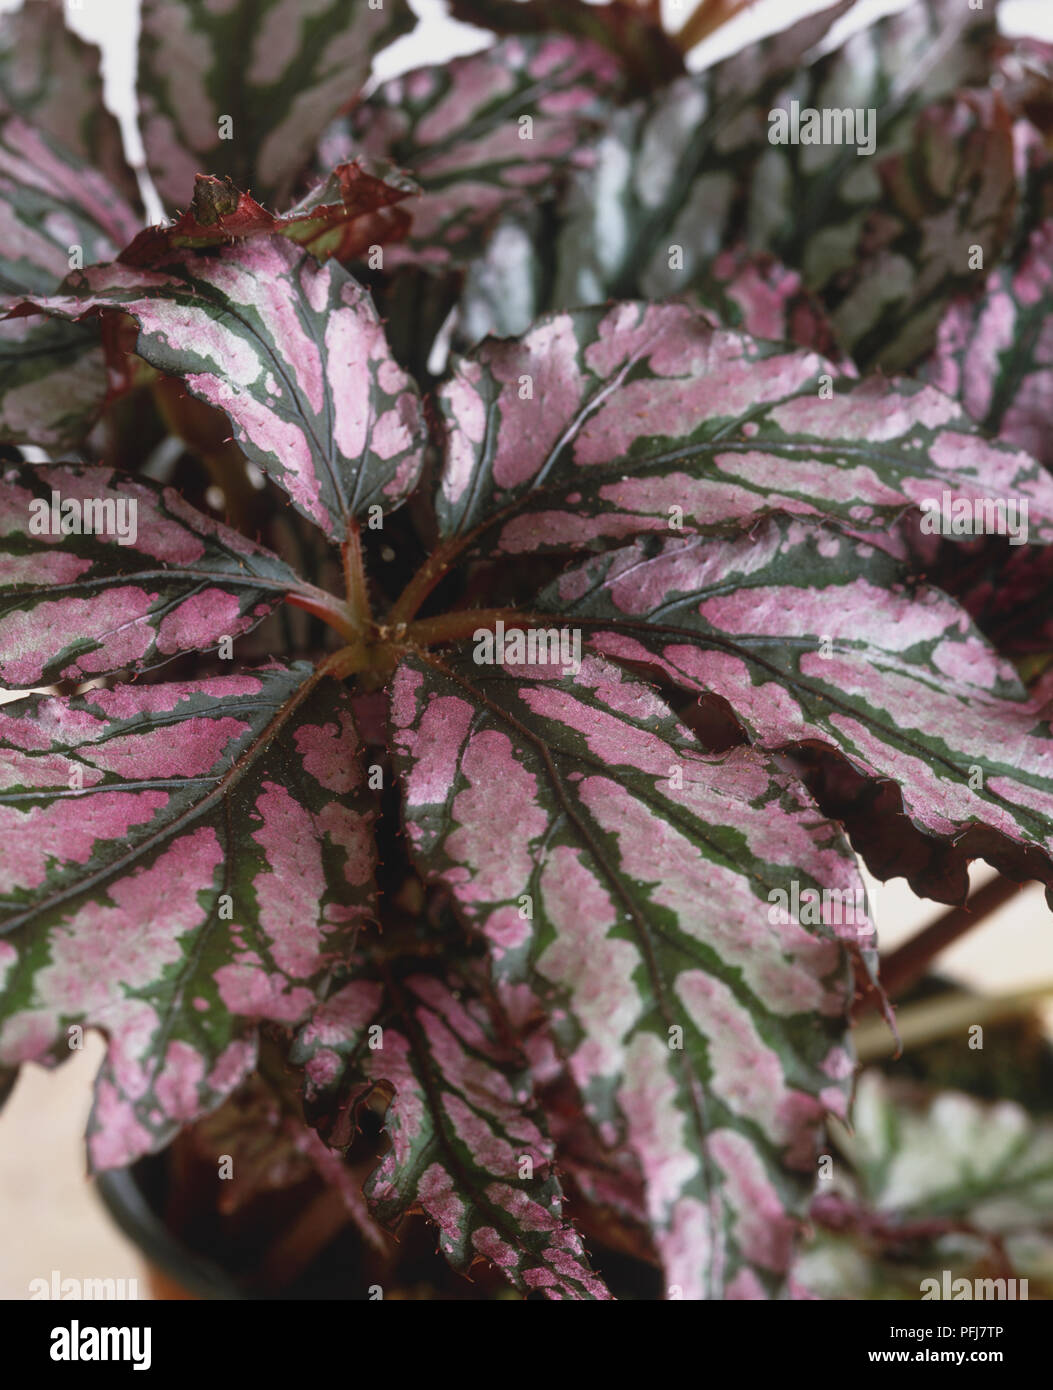 Begonia benichoma, leaves divided into several leaflets, veined with purple-green pattern, close-up Stock Photo